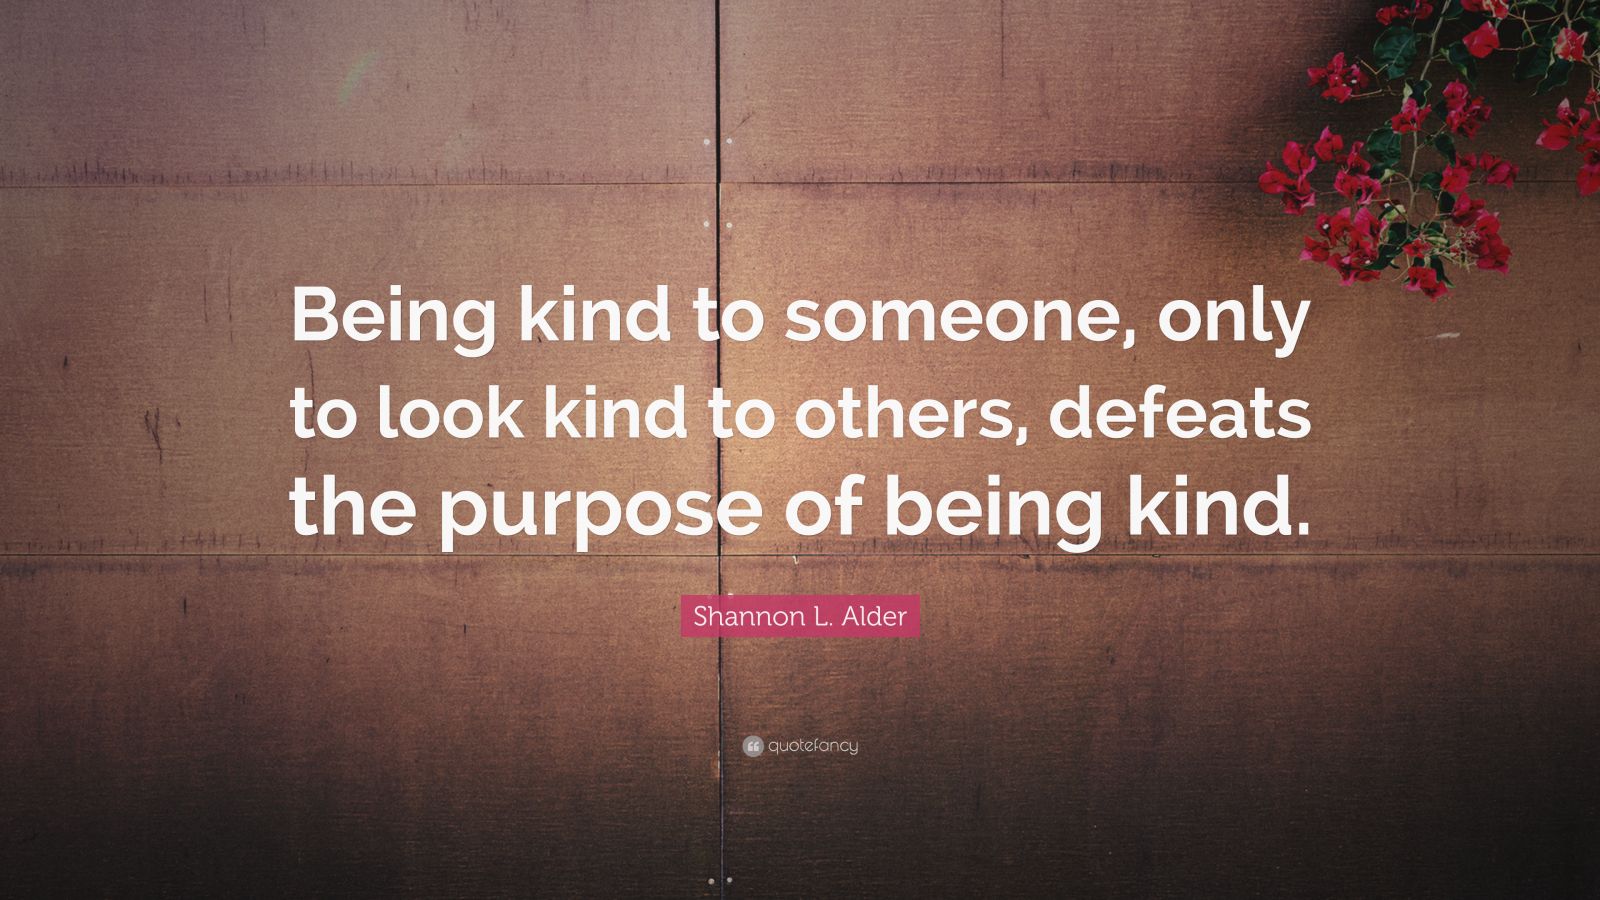 Shannon L. Alder Quote: “Being kind to someone, only to look kind to ...